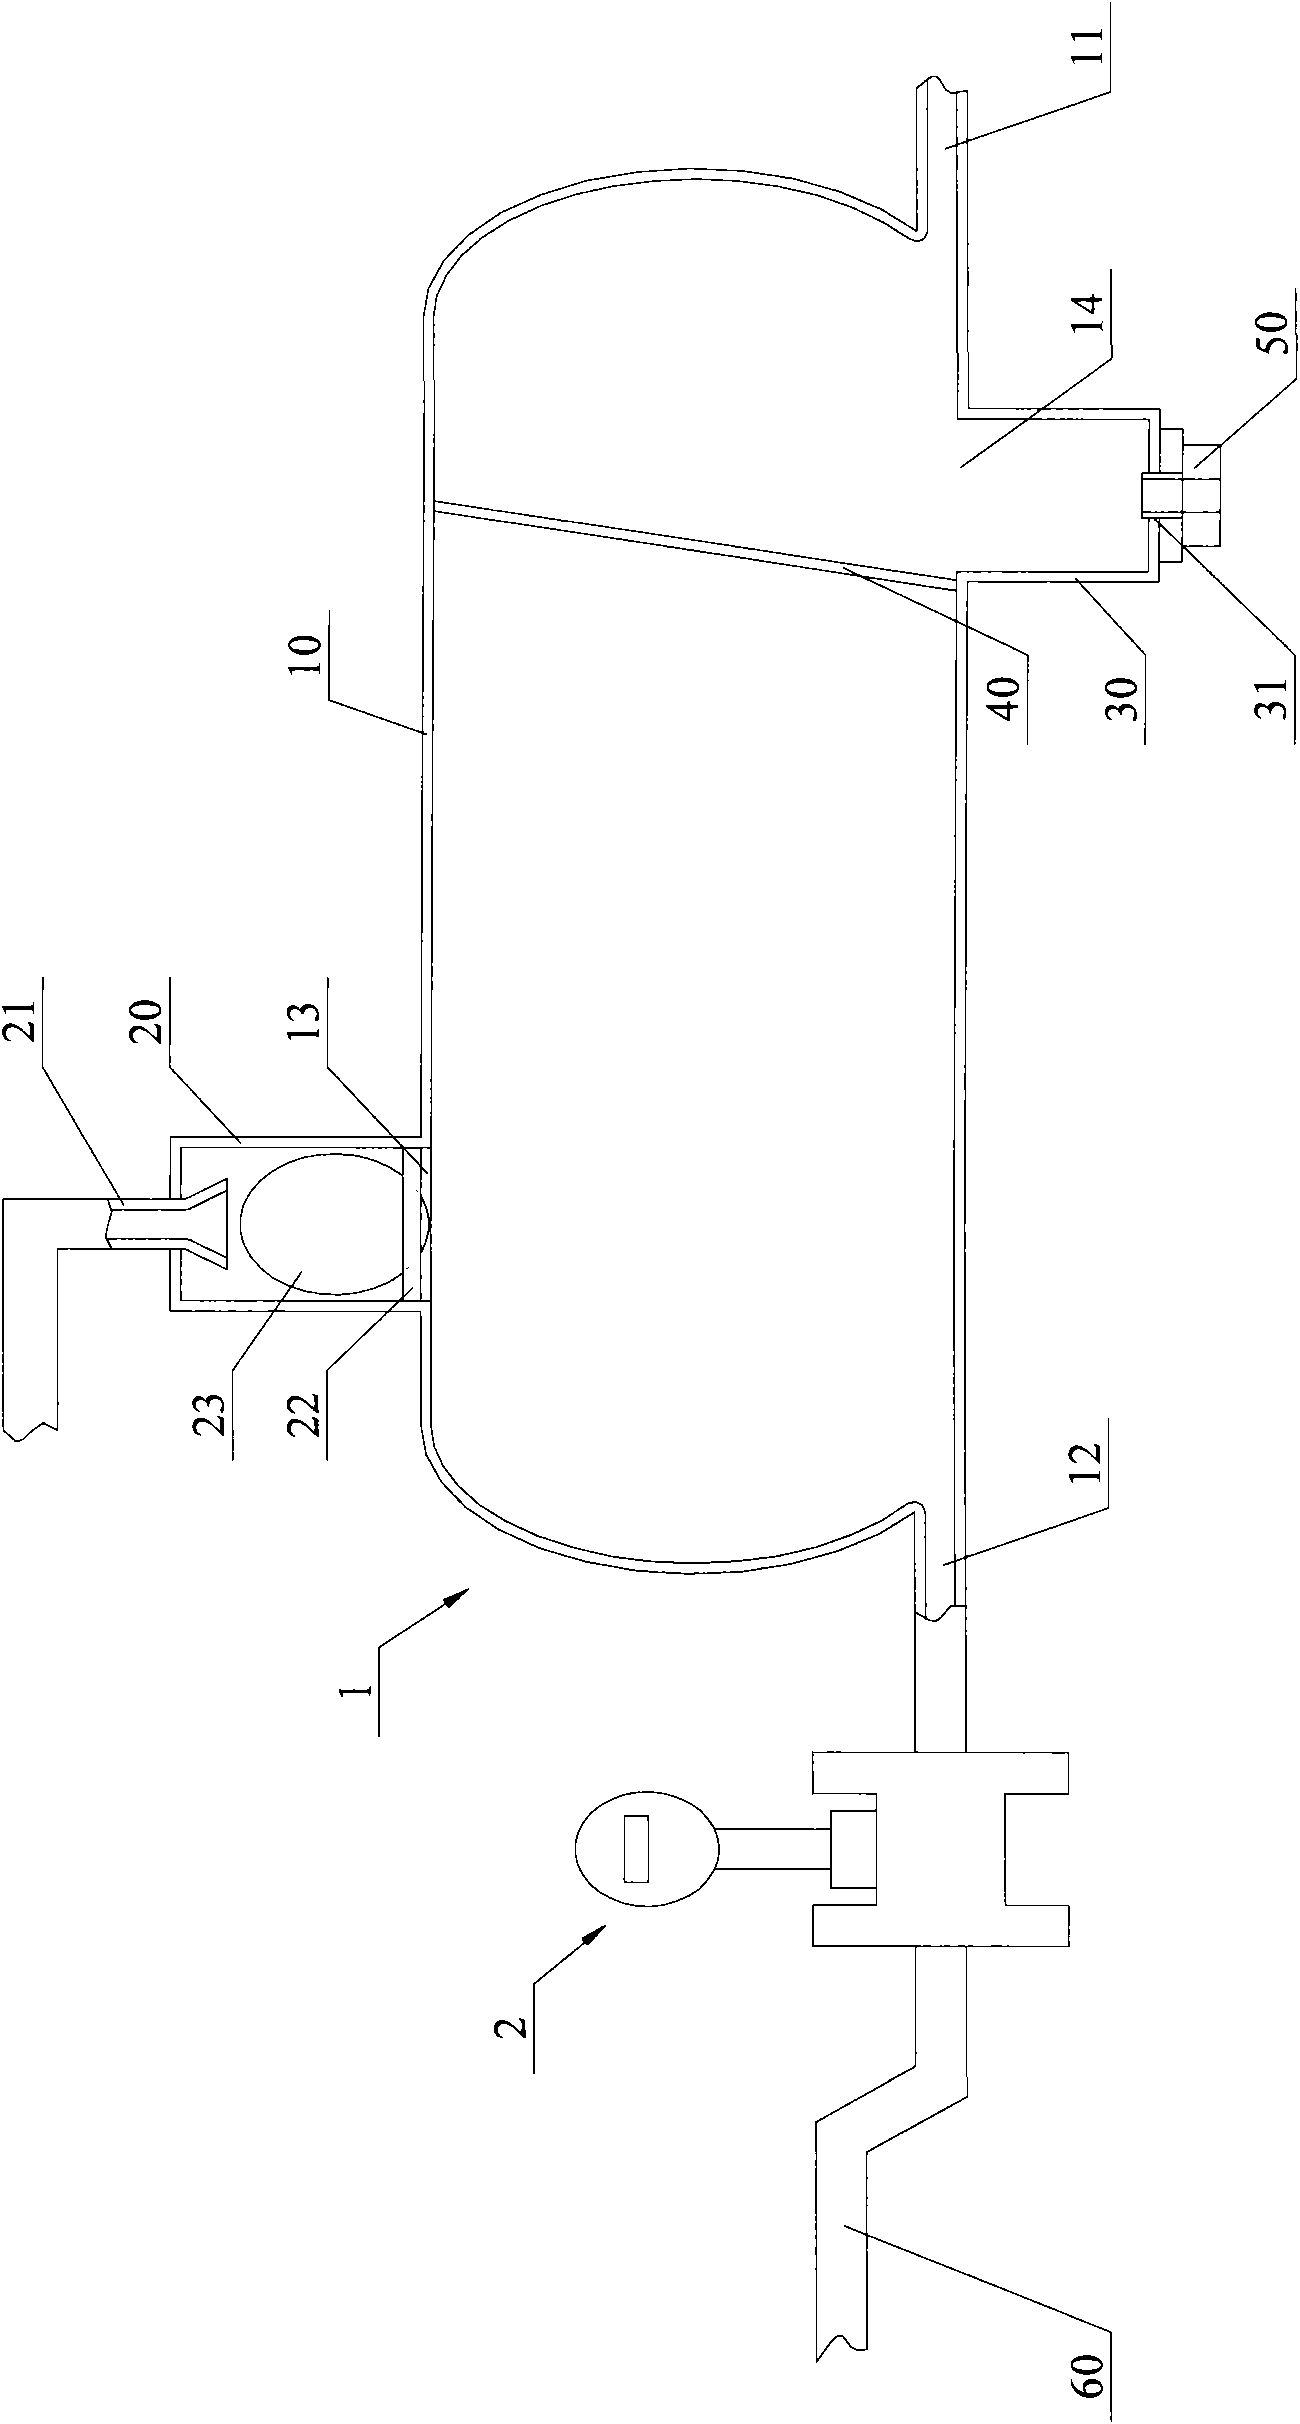 Separator and flowmeter assembly with same